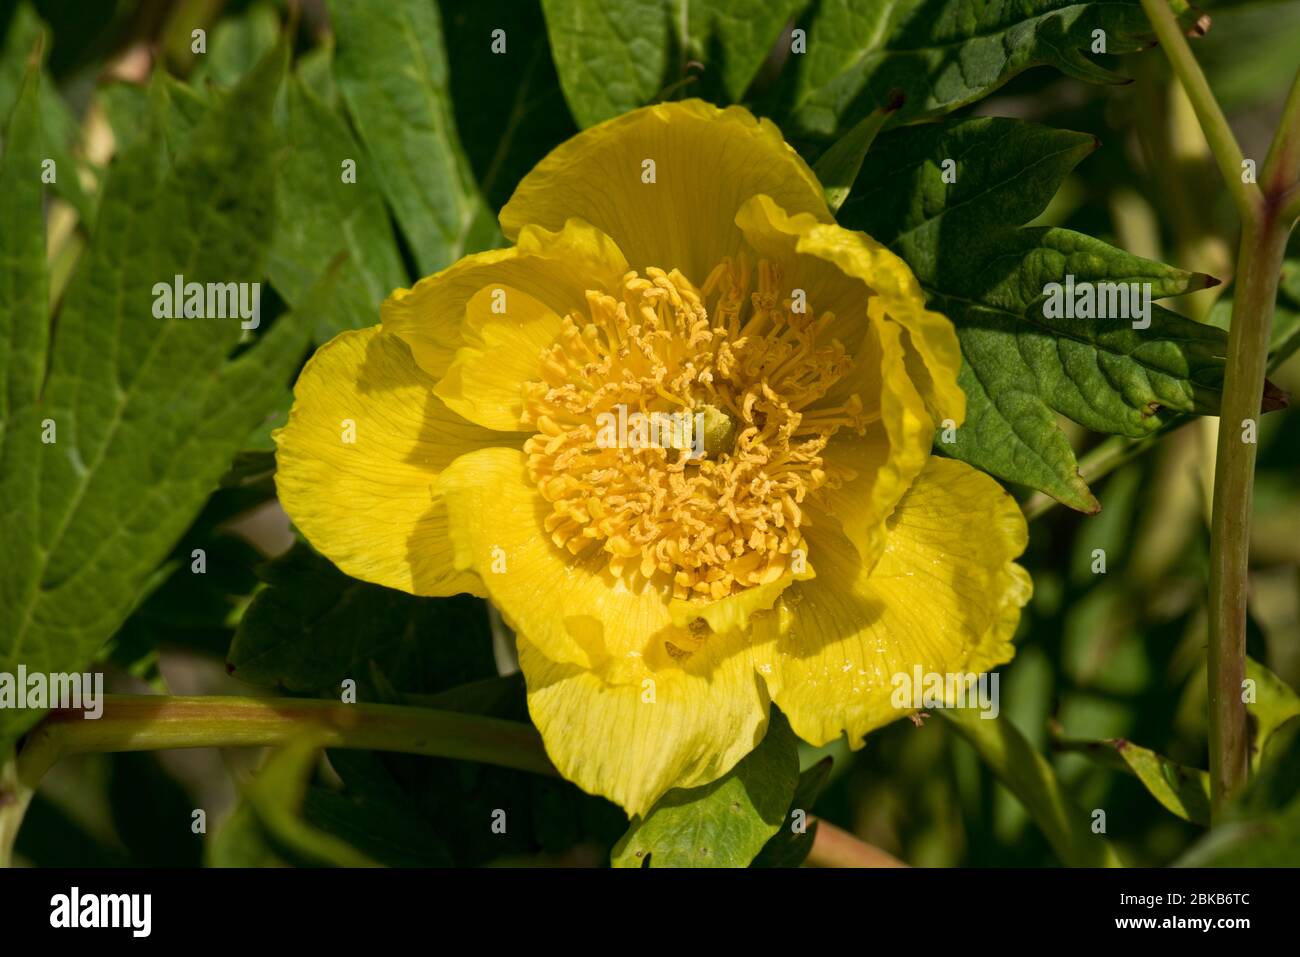 Ludlow's tree peony ( Paeonia ludlowii) young leaves and yellow saucer-shaped flowers, Berkshire, April, Stock Photo